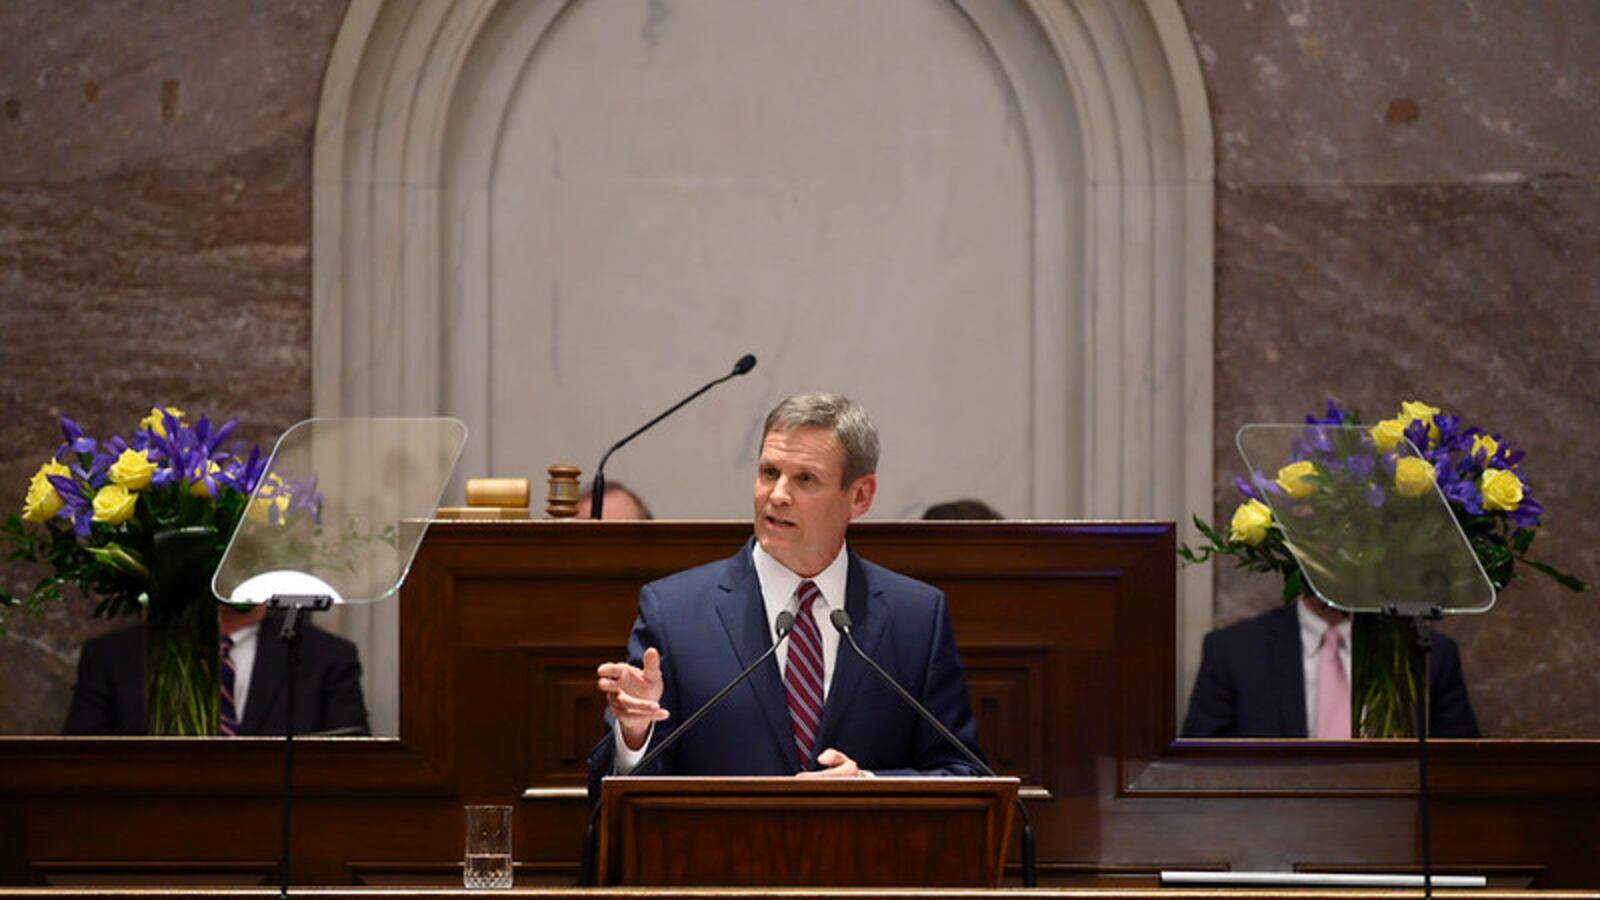 Gov. Bill Lee delivers his second State of the State Address to the Tennessee General Assembly in Nashville.